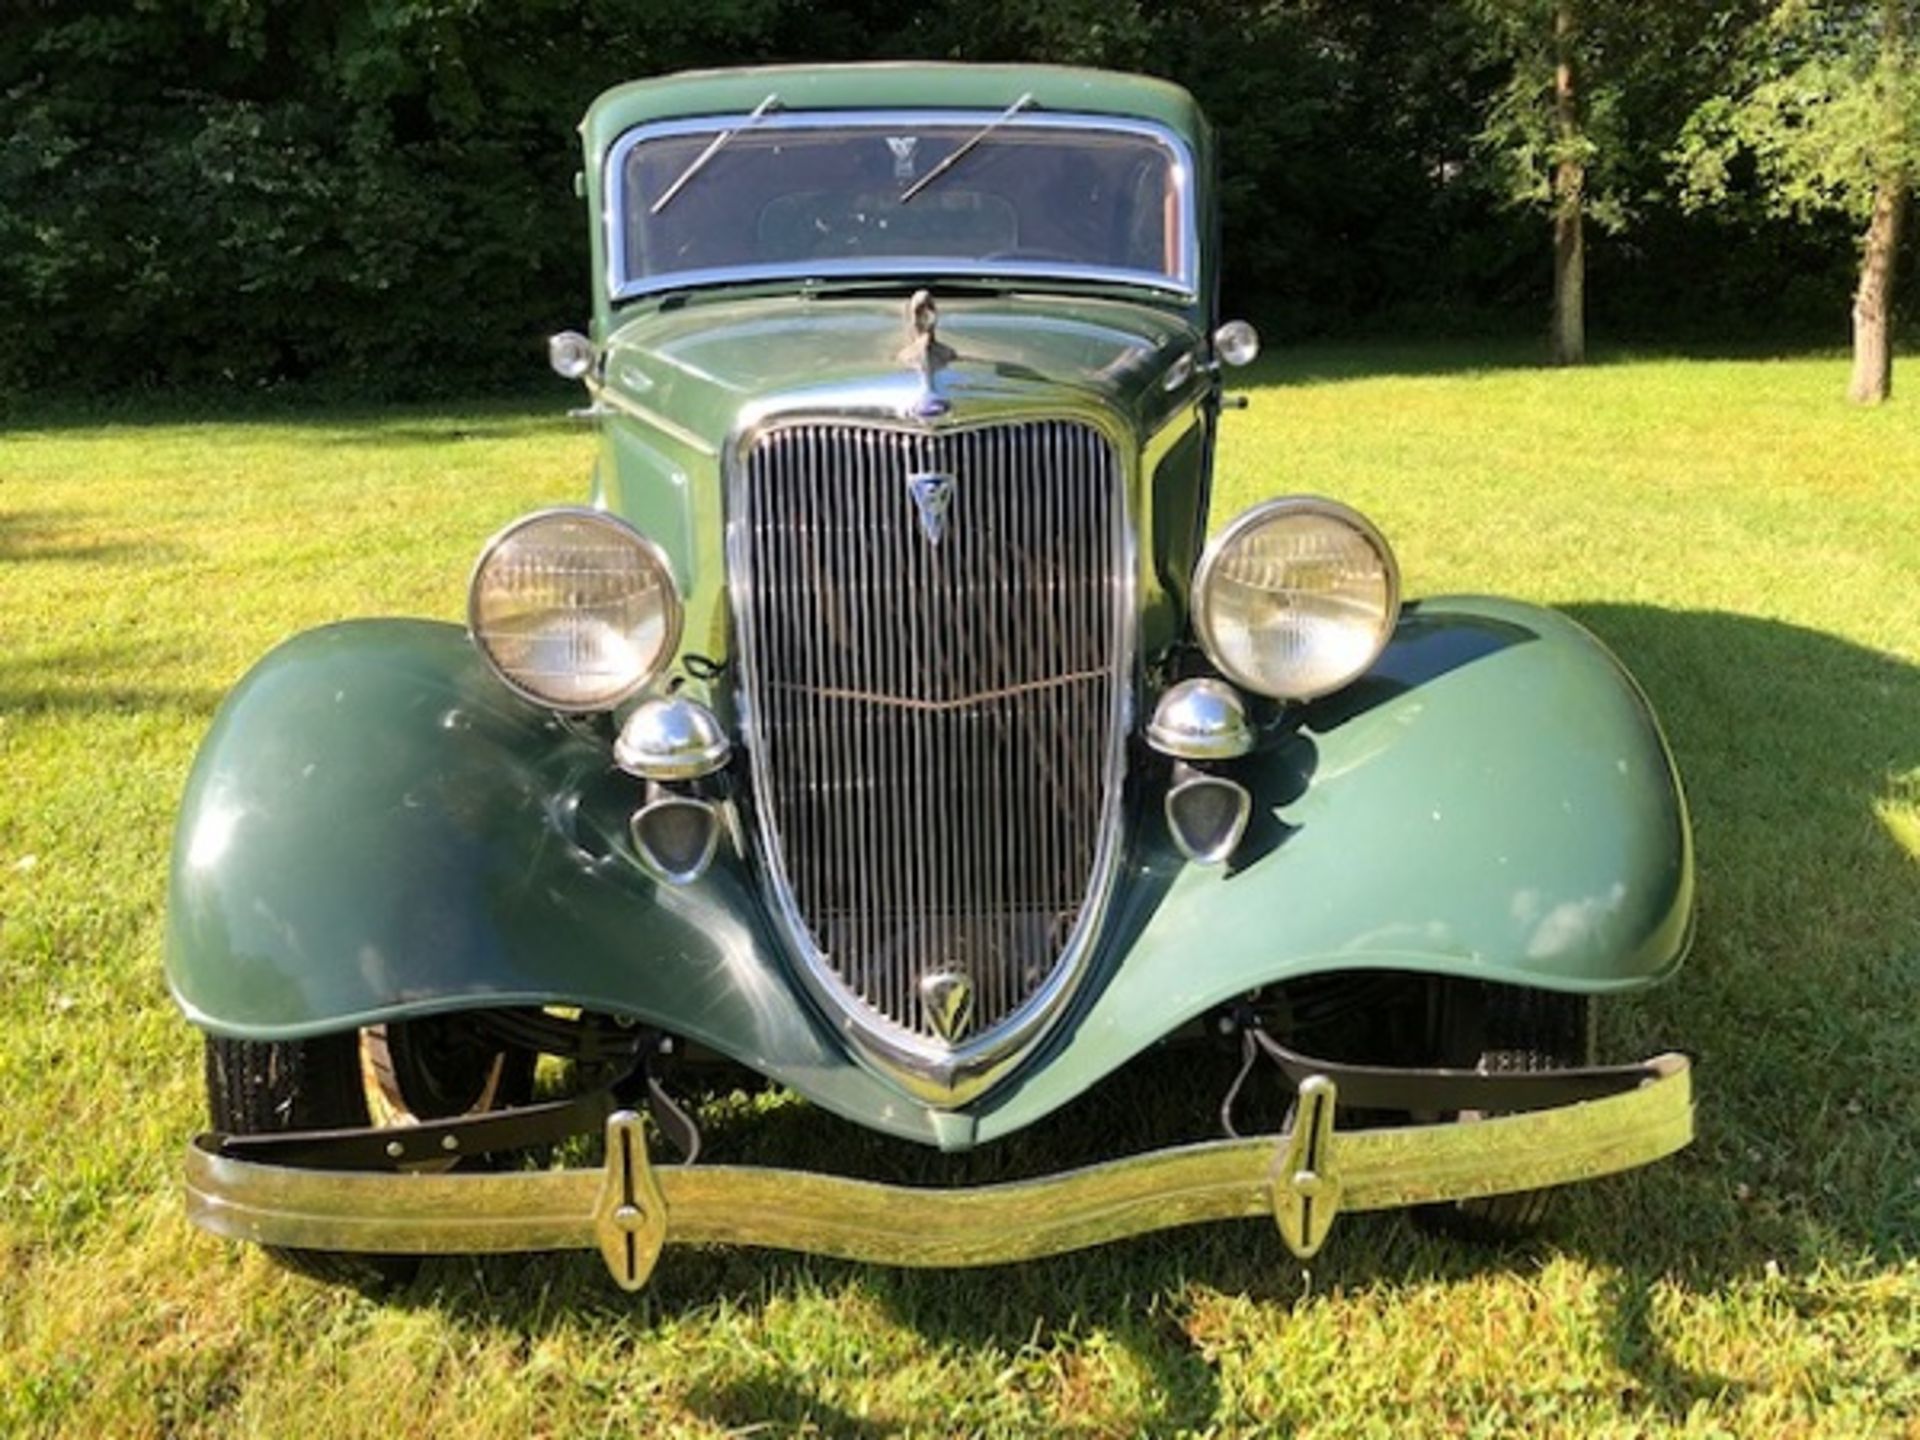 1934 Ford Victoria completely refinished with rare pop-out trunk option, second owner, 22,024